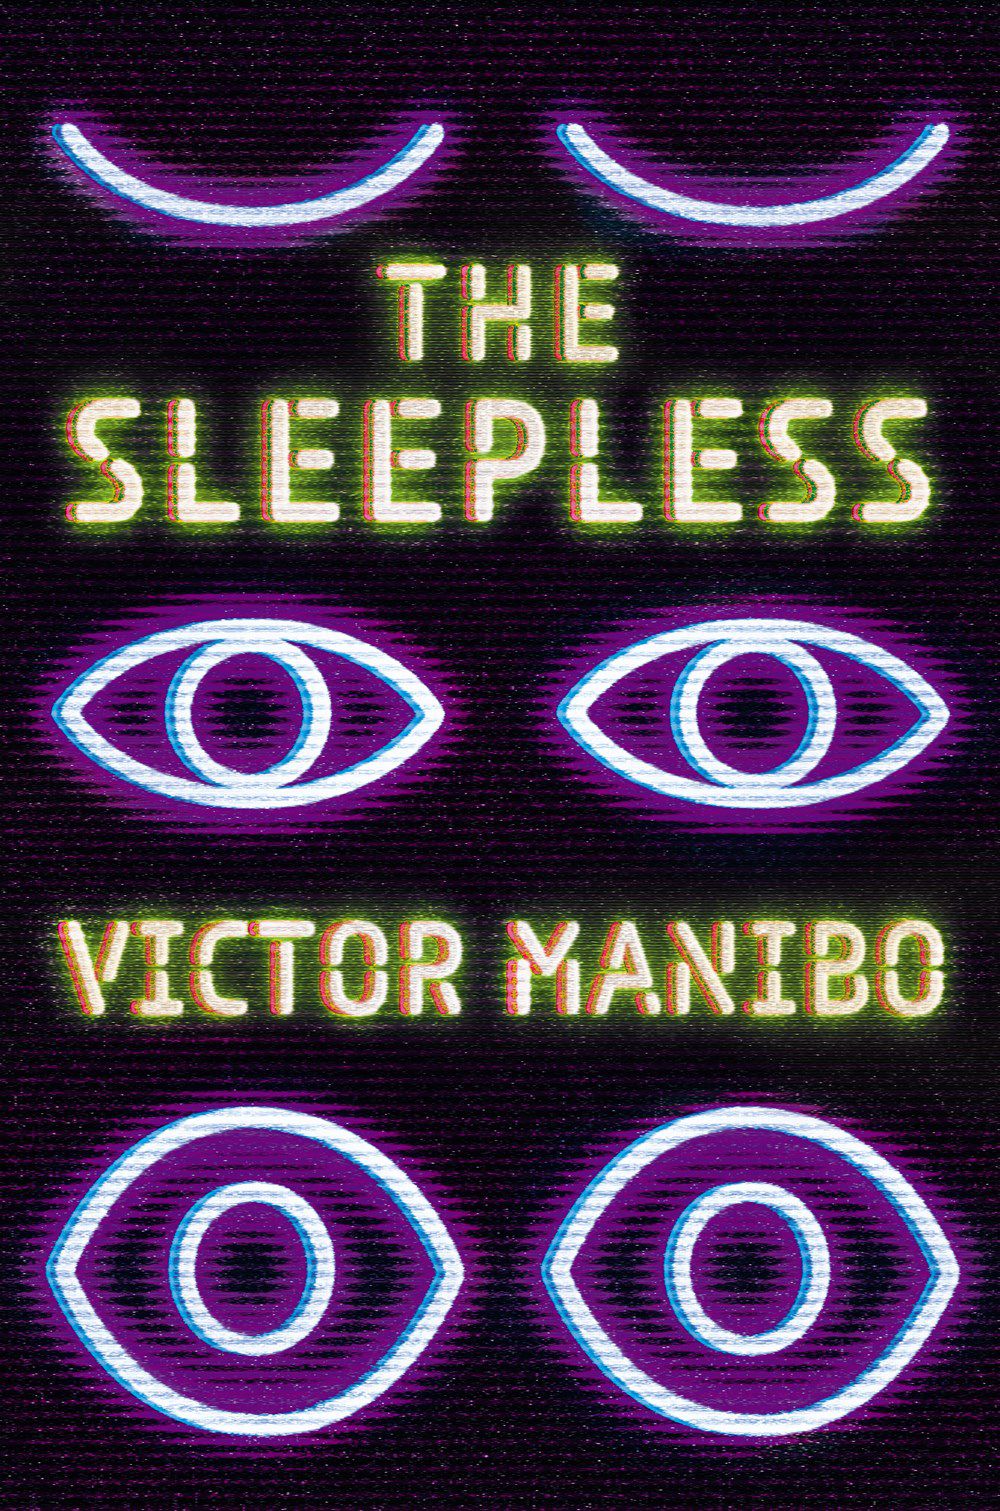 Cover photo of The Sleepless by Victor Manibo with three pairs of eyes in neon lights gradually opening.